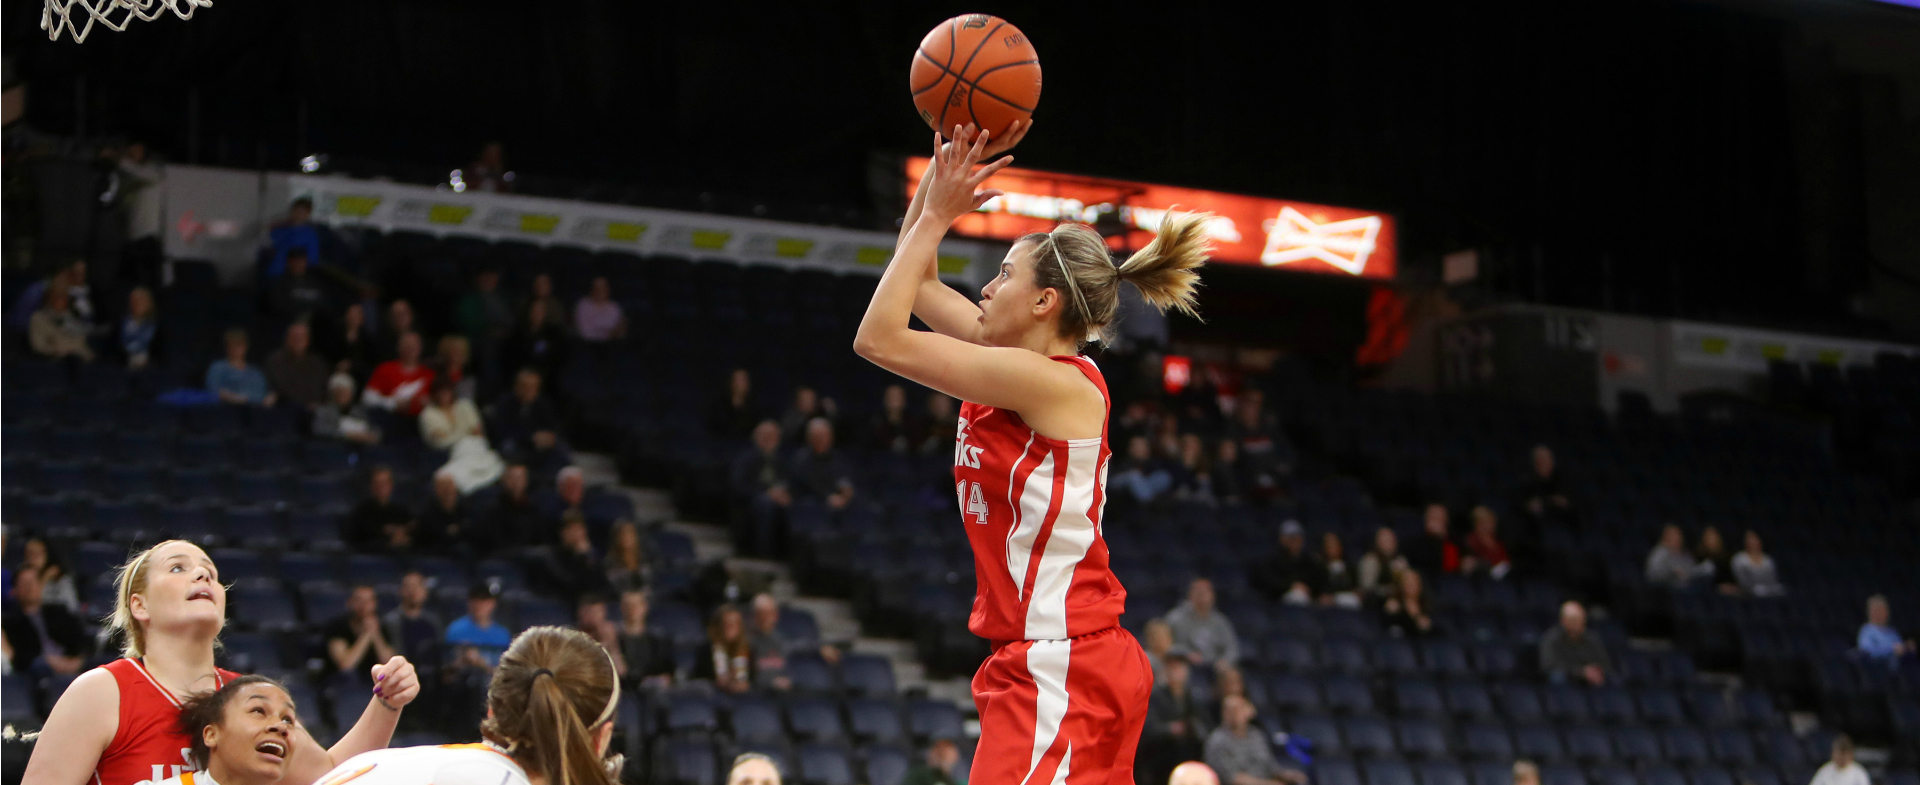 Capers narrowly defeat Sea-Hawks at AUS Championships